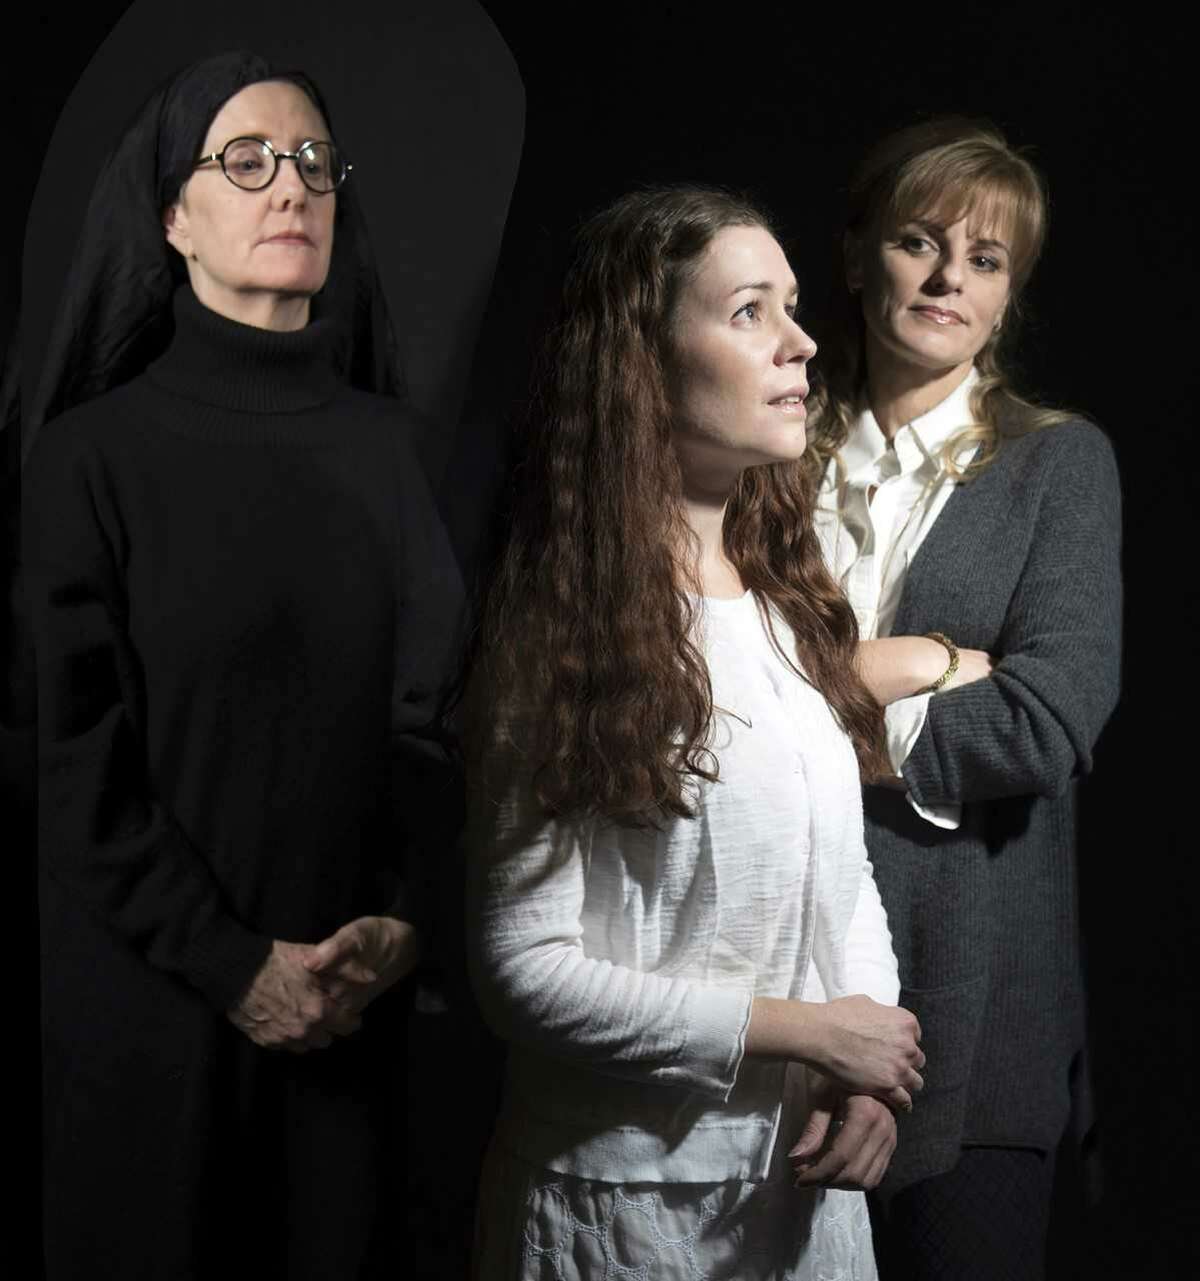 Summoned to a convent, Dr. Martha Livingstone (Yvonne Perry, right) a court-appointed psychiatrist, is charged with assessing the sanity of a novice (Jacqueline Donnaruma, center) accused of murdering her newborn, under the watchful eye of Miriam Ruth, the Mother Superior (Leigh Strimbeck, left) in "Agnes of God". Theater Voices will present a staged reading of John Pielmeier's compelling play, directed by Maggie Mancinelli-Cahill, on February 16 at 8pm, February 17 at 3 & 8pm and February 18 at 3pm, at Steamer No. 10 Theatre, 500 Western Avenue, Albany. Admission is free. Please credit: Photo by Katria Foster